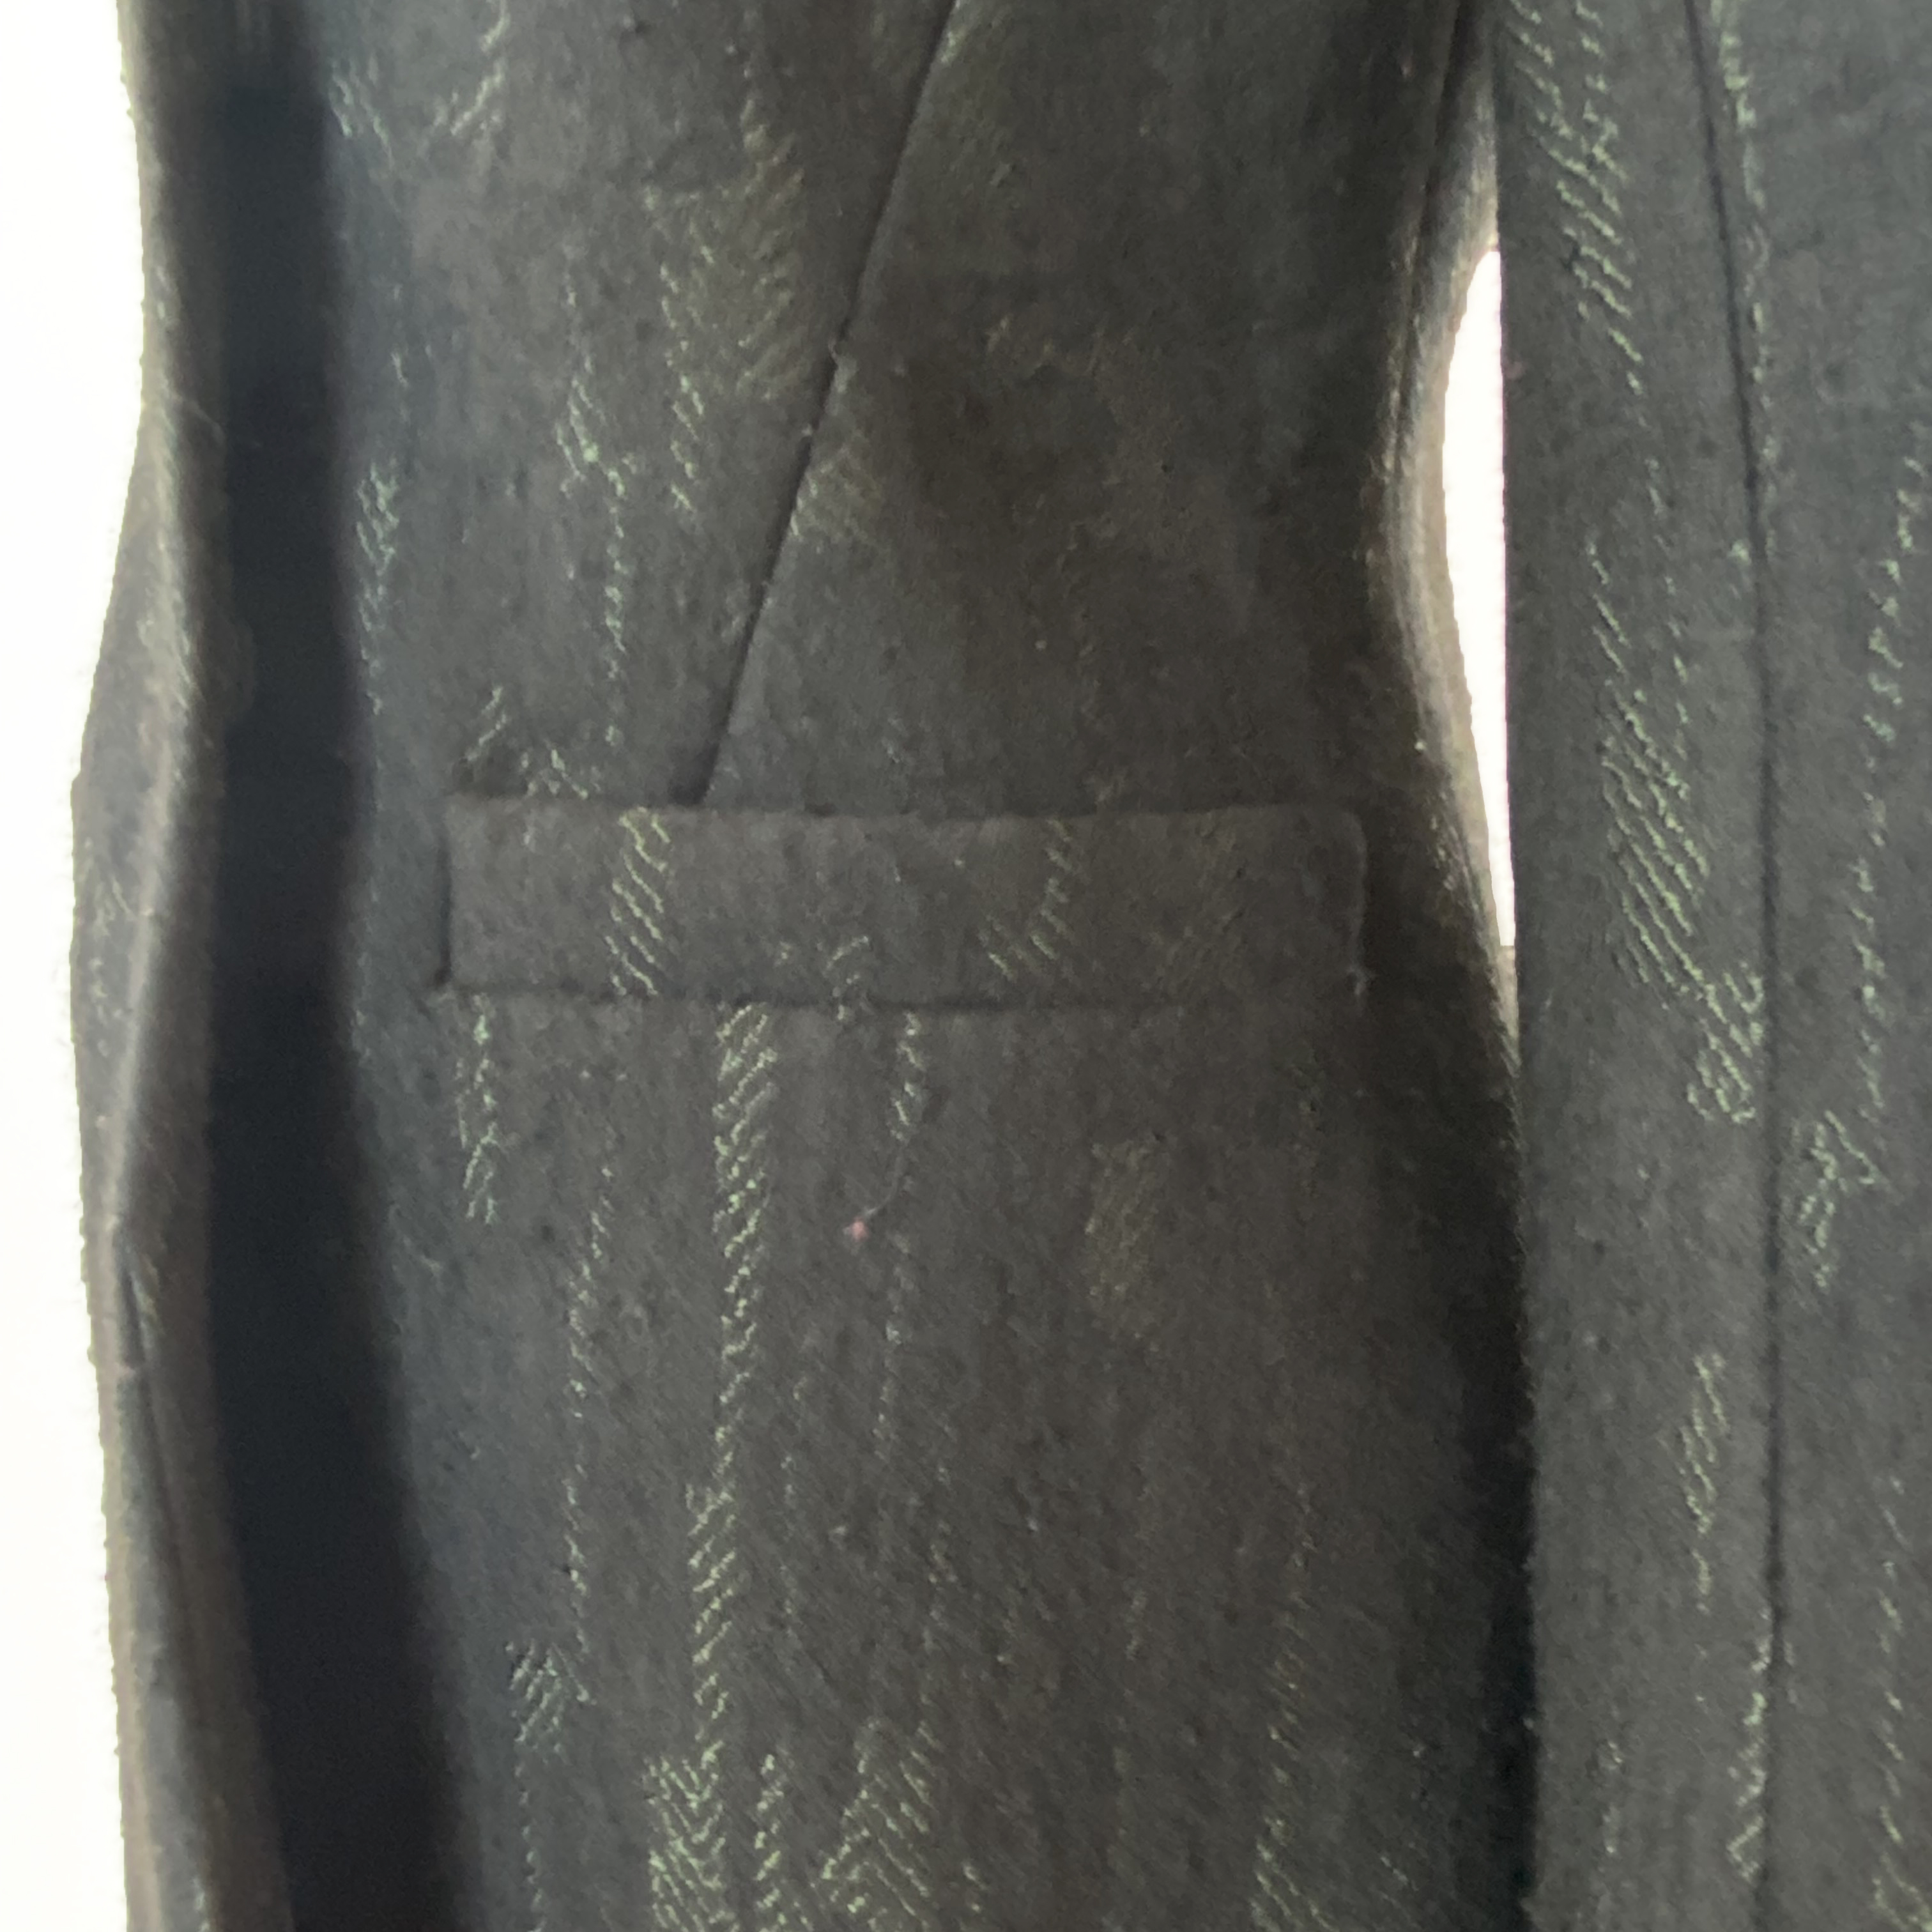 Scanlan & Theodore Tailored Charcoal Jacket